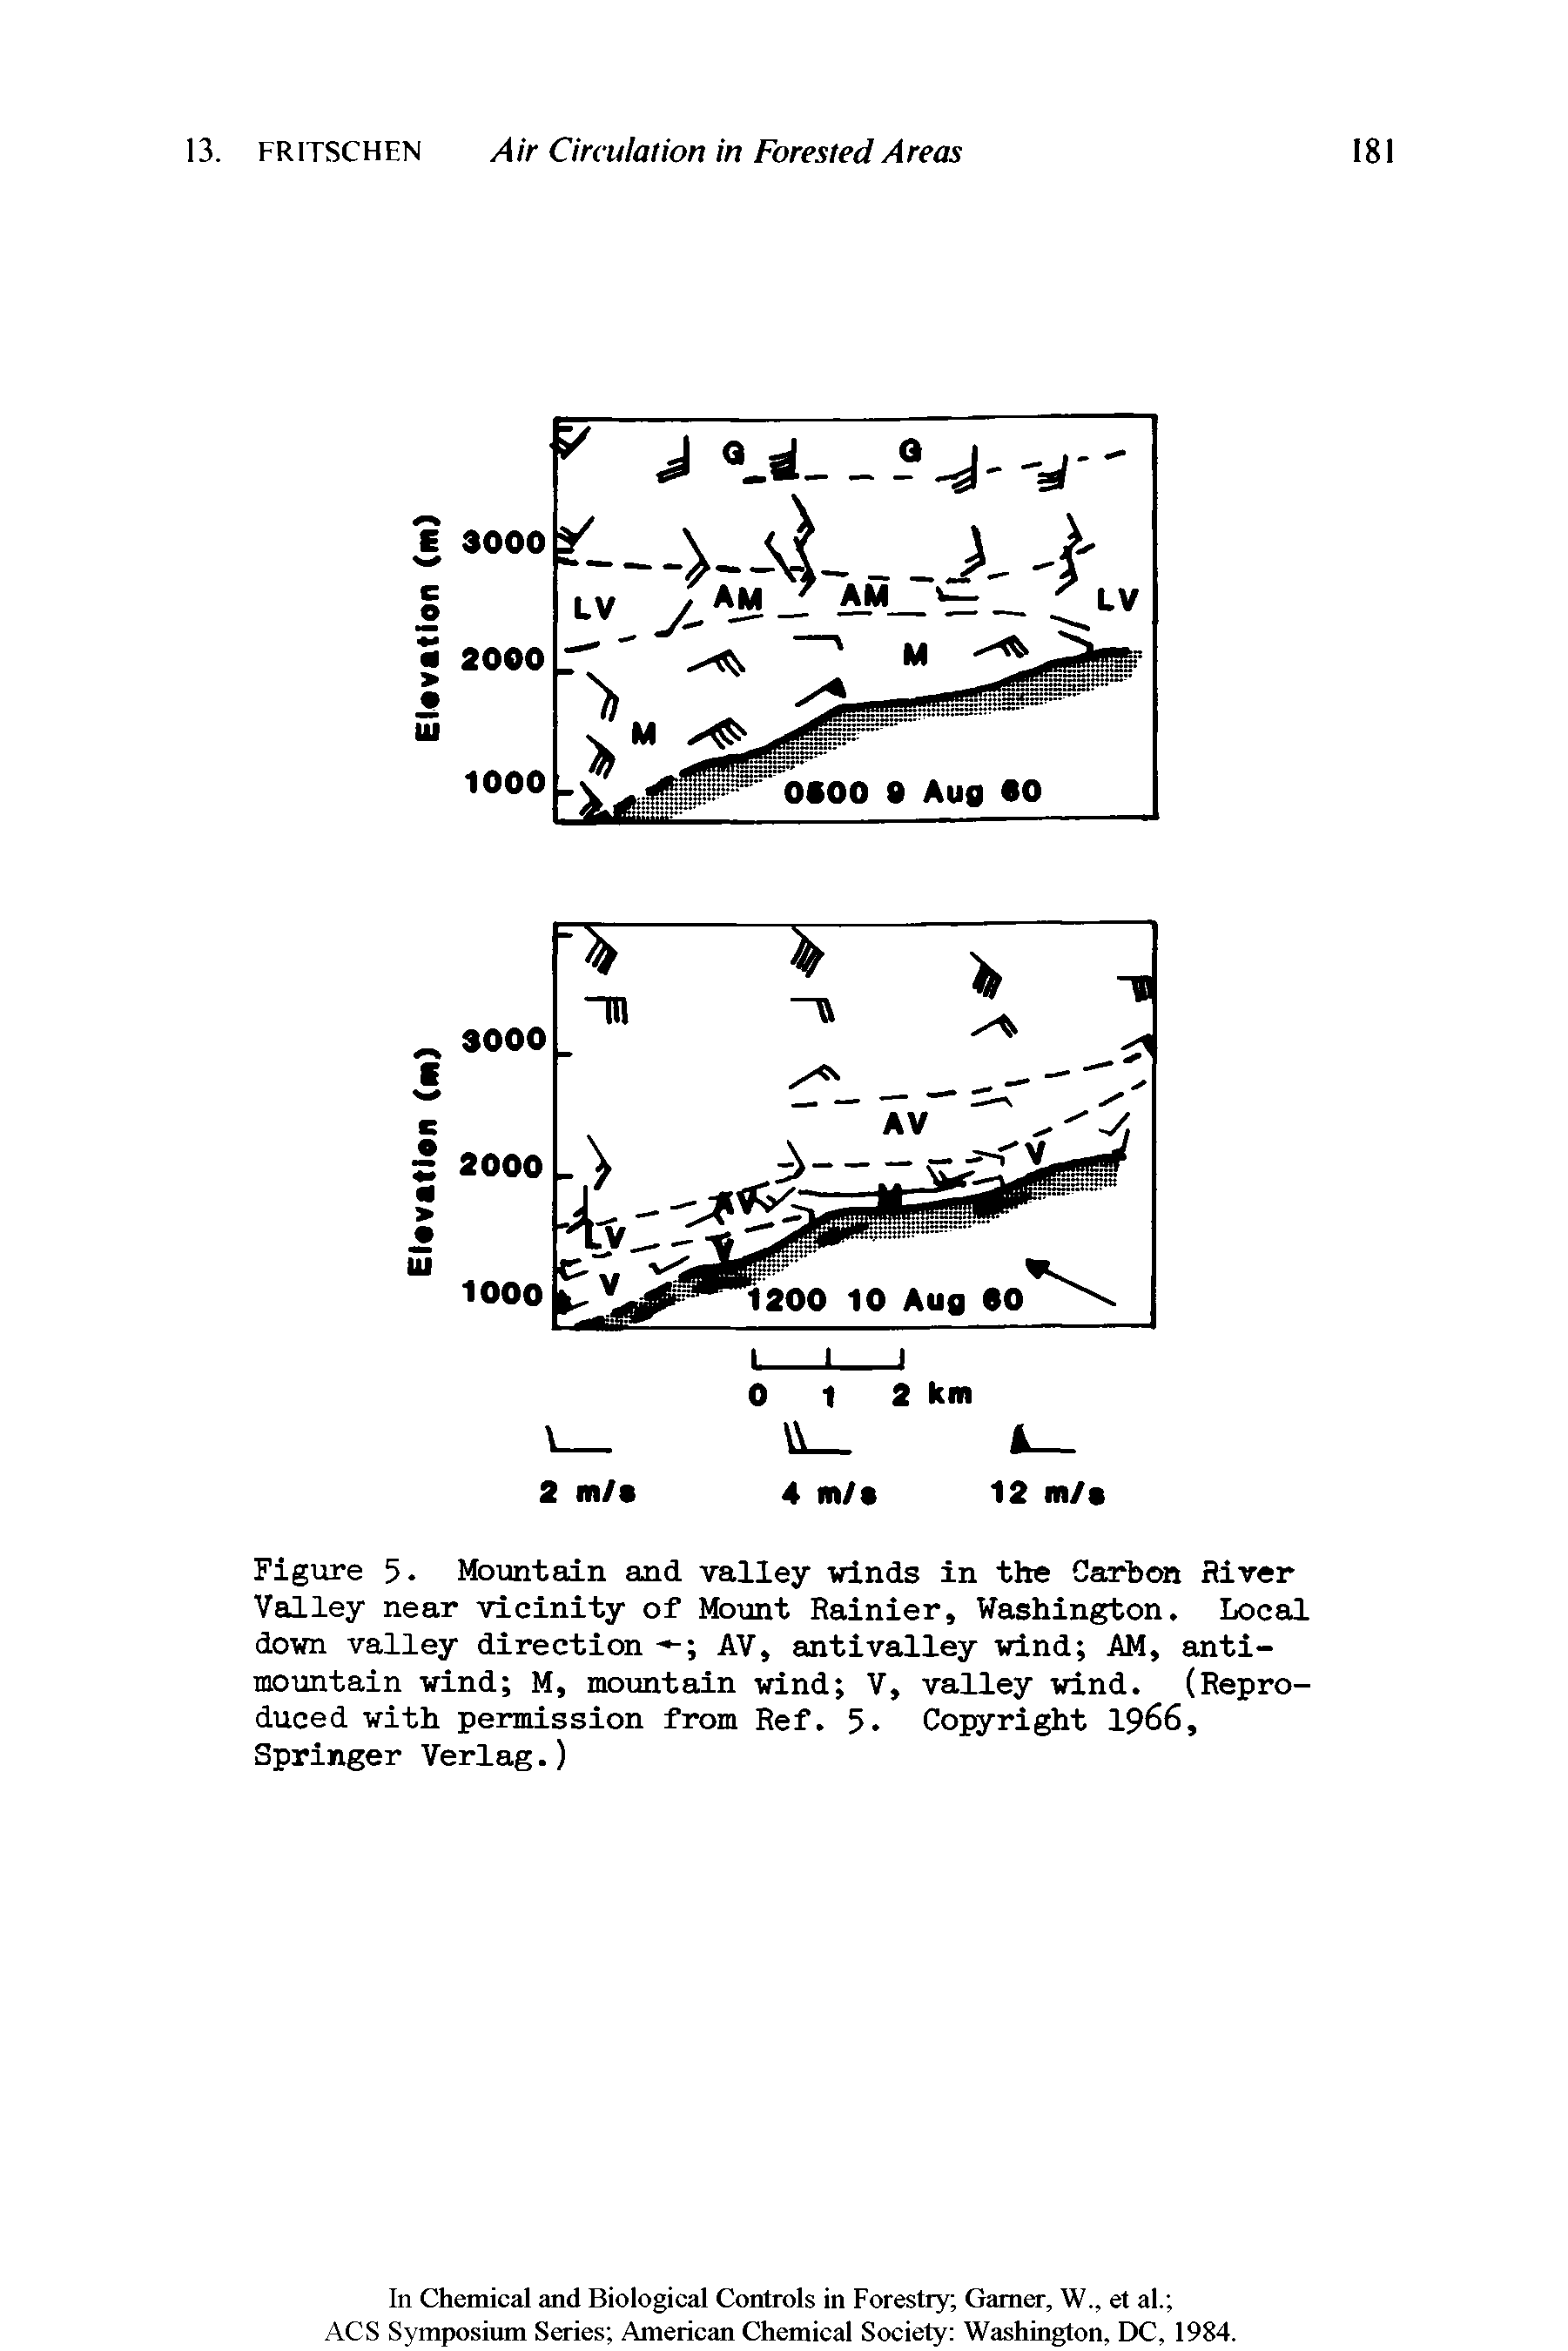 Figure 5. Mountain and valley winds in the Carbon River Valley near -vicinity of Mount Rainier, Washington. Local down valley direction AV, antivalley wind AM, antimountain wind M, mountain wind V, valley wind. (Reproduced with permission from Ref. 5. Copyright 1966, Springer Verlag.)...